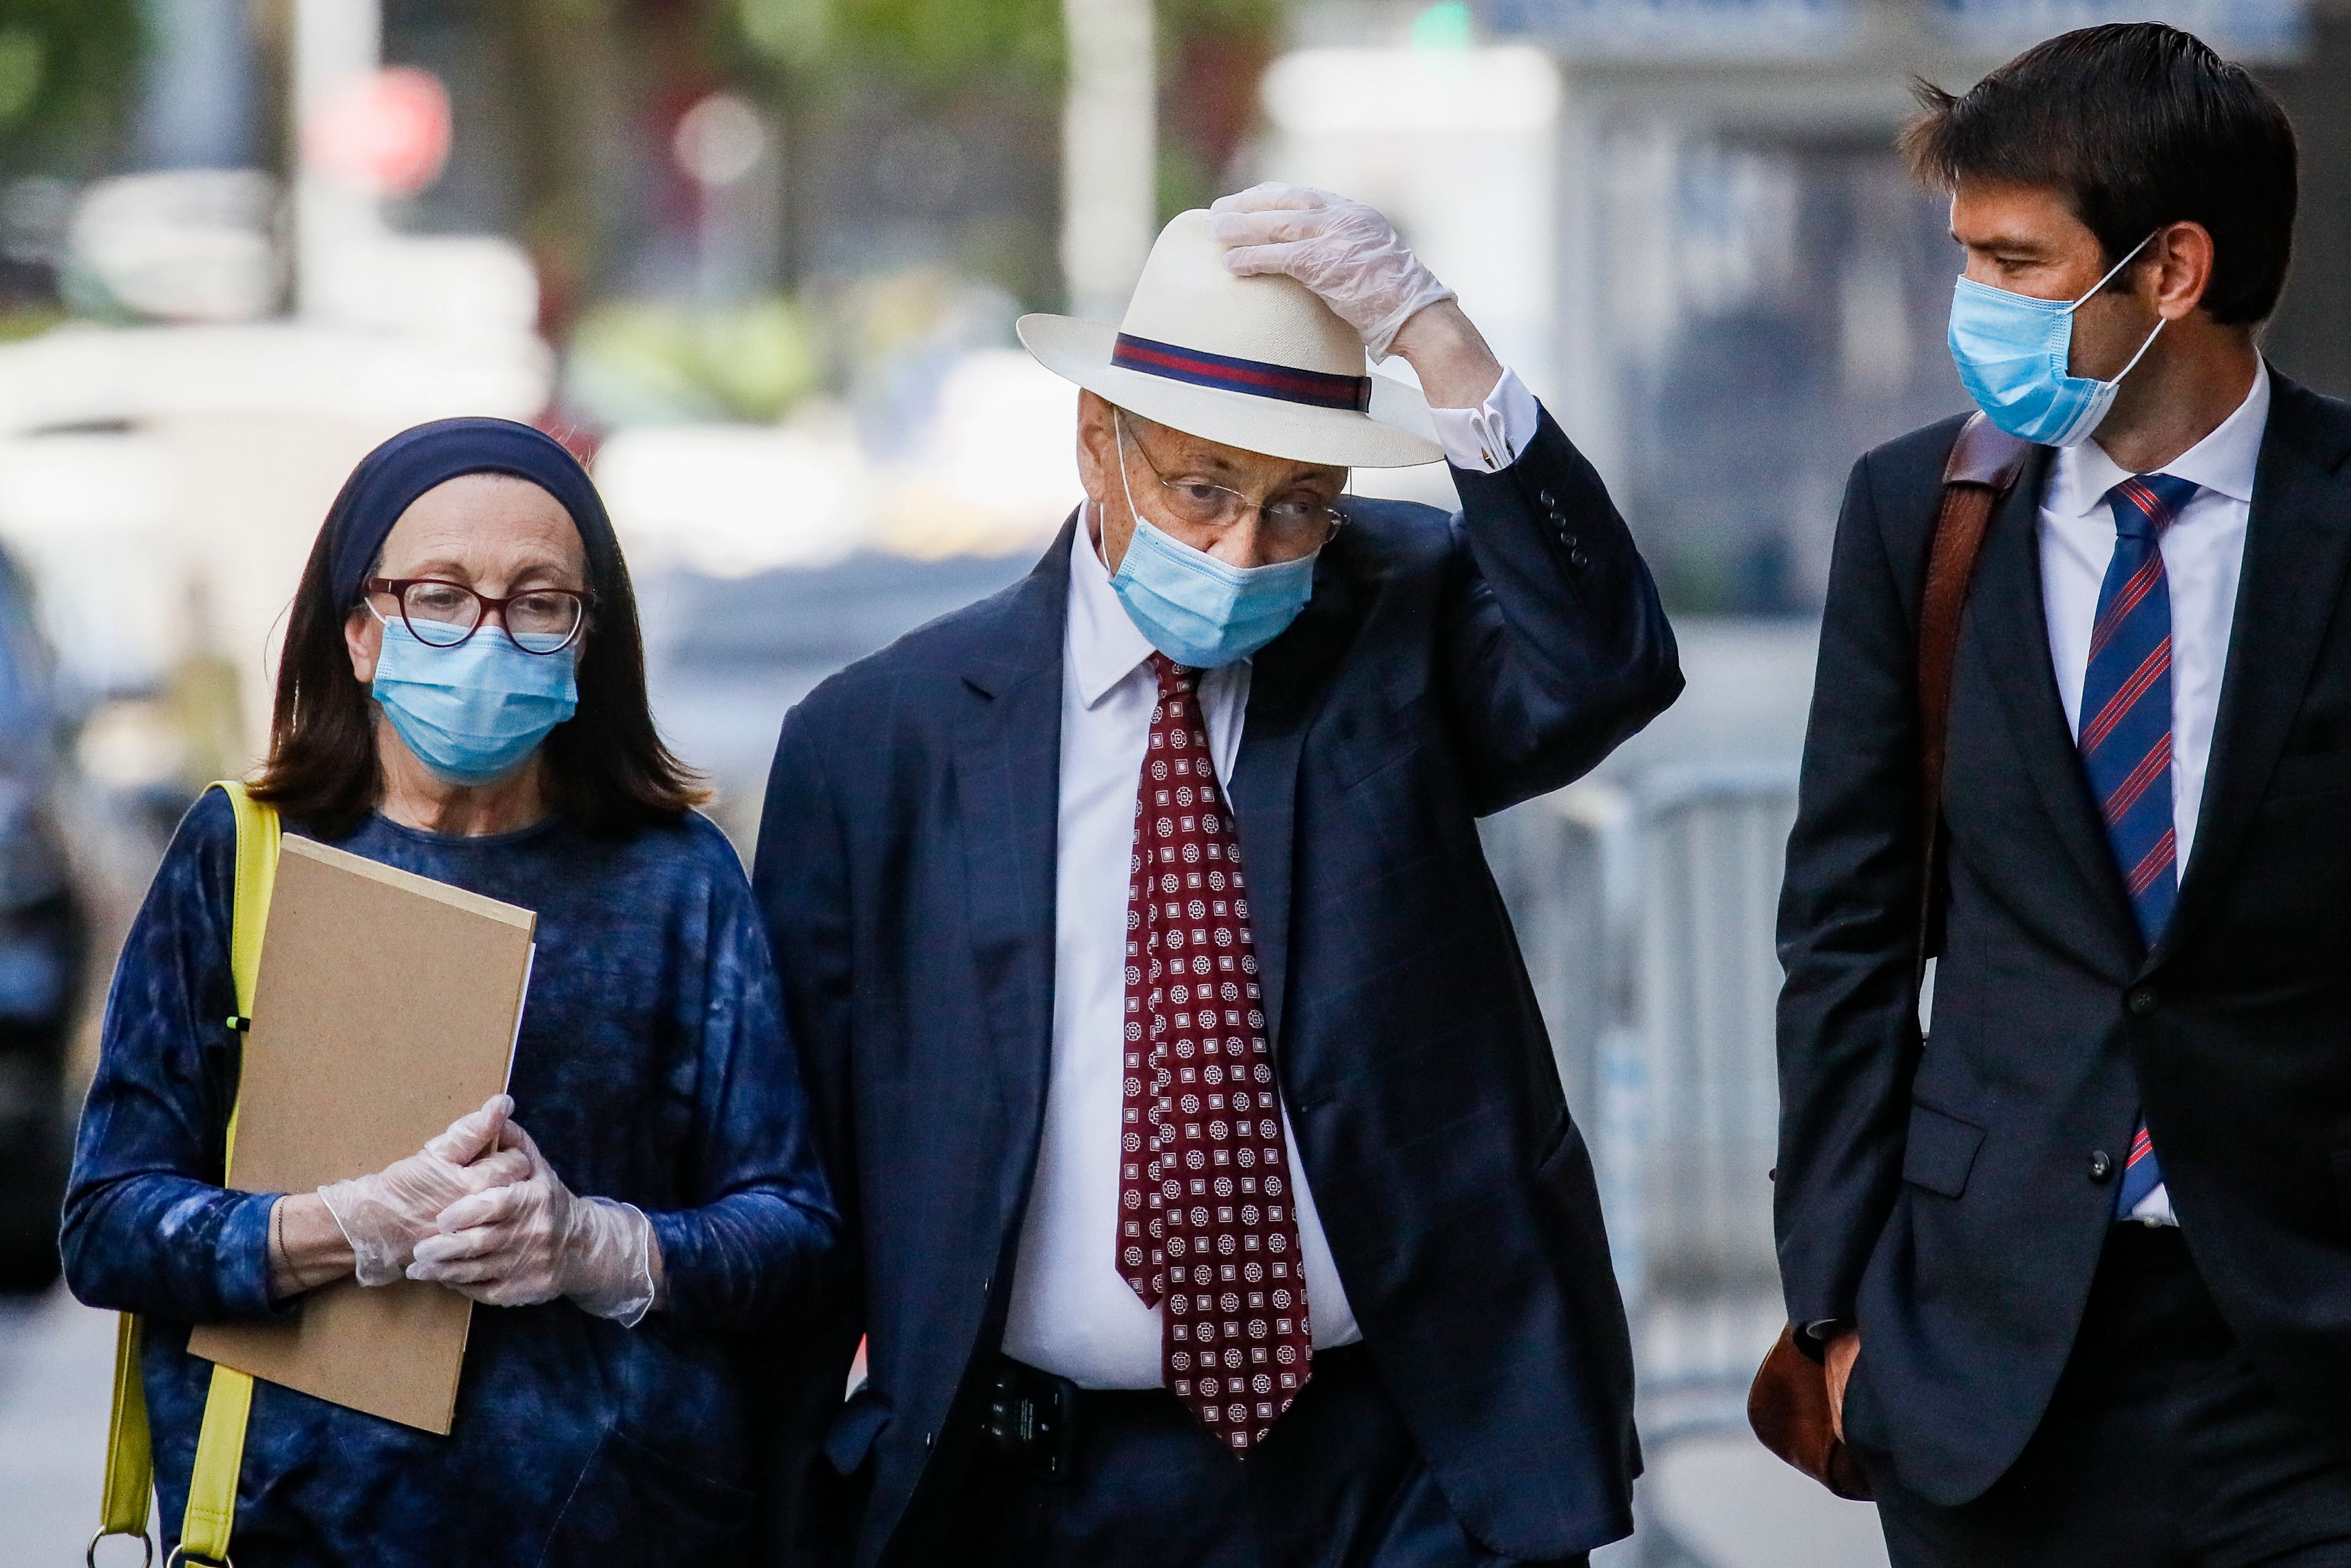 Sheldon Silver, wearing a surgical mask and gloves, wears a suit and hat while walking with two aides